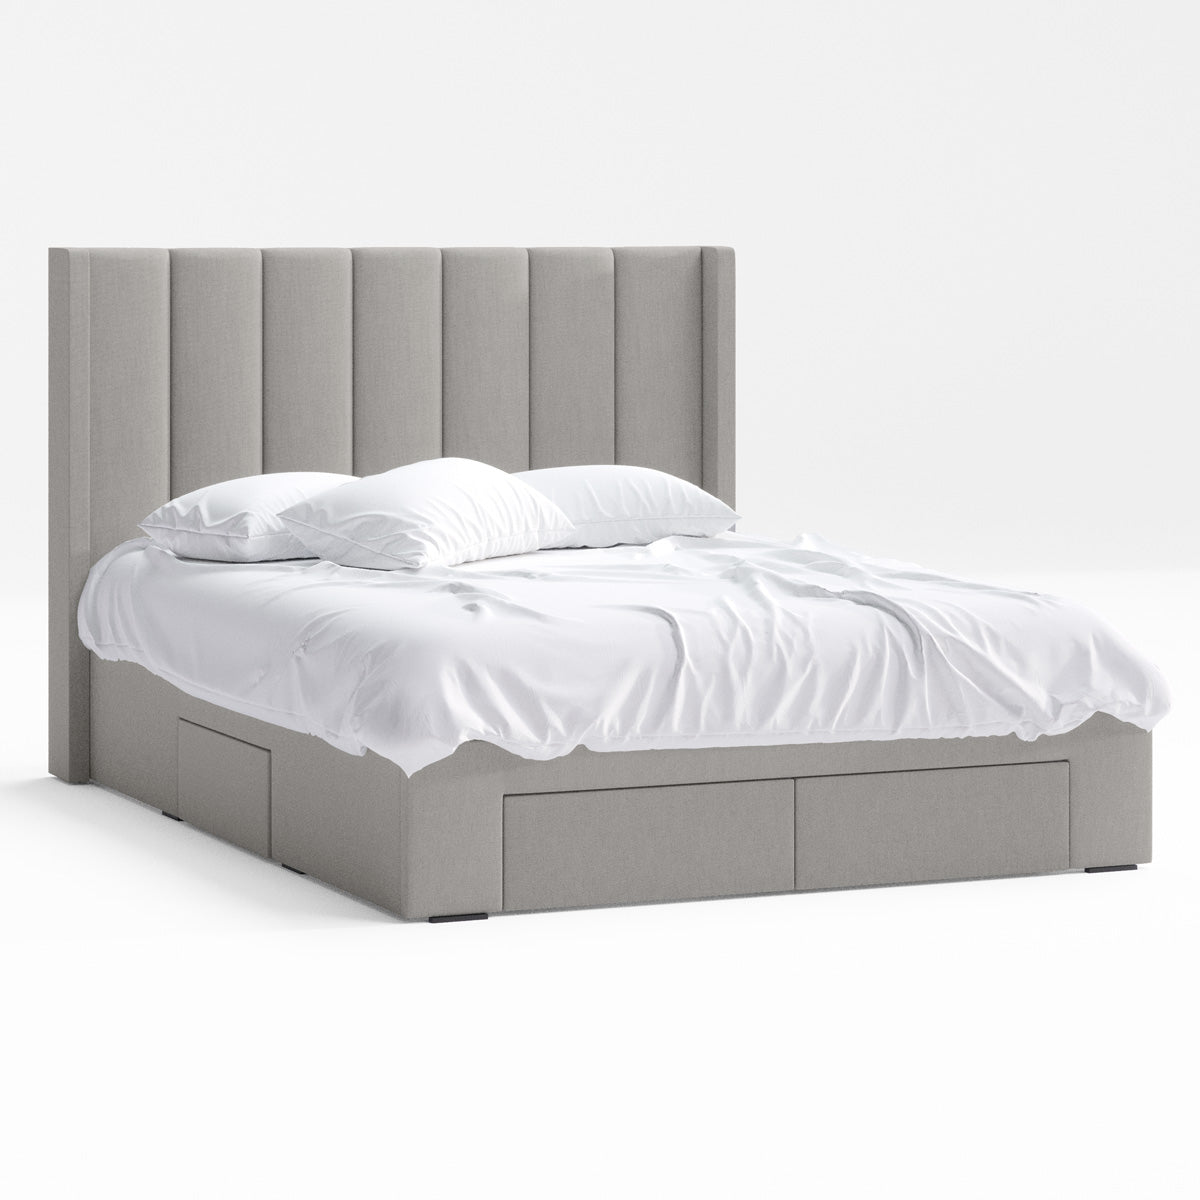 Emilie Winged Bed Frame with Four Storage Drawers (Grey Fabric)